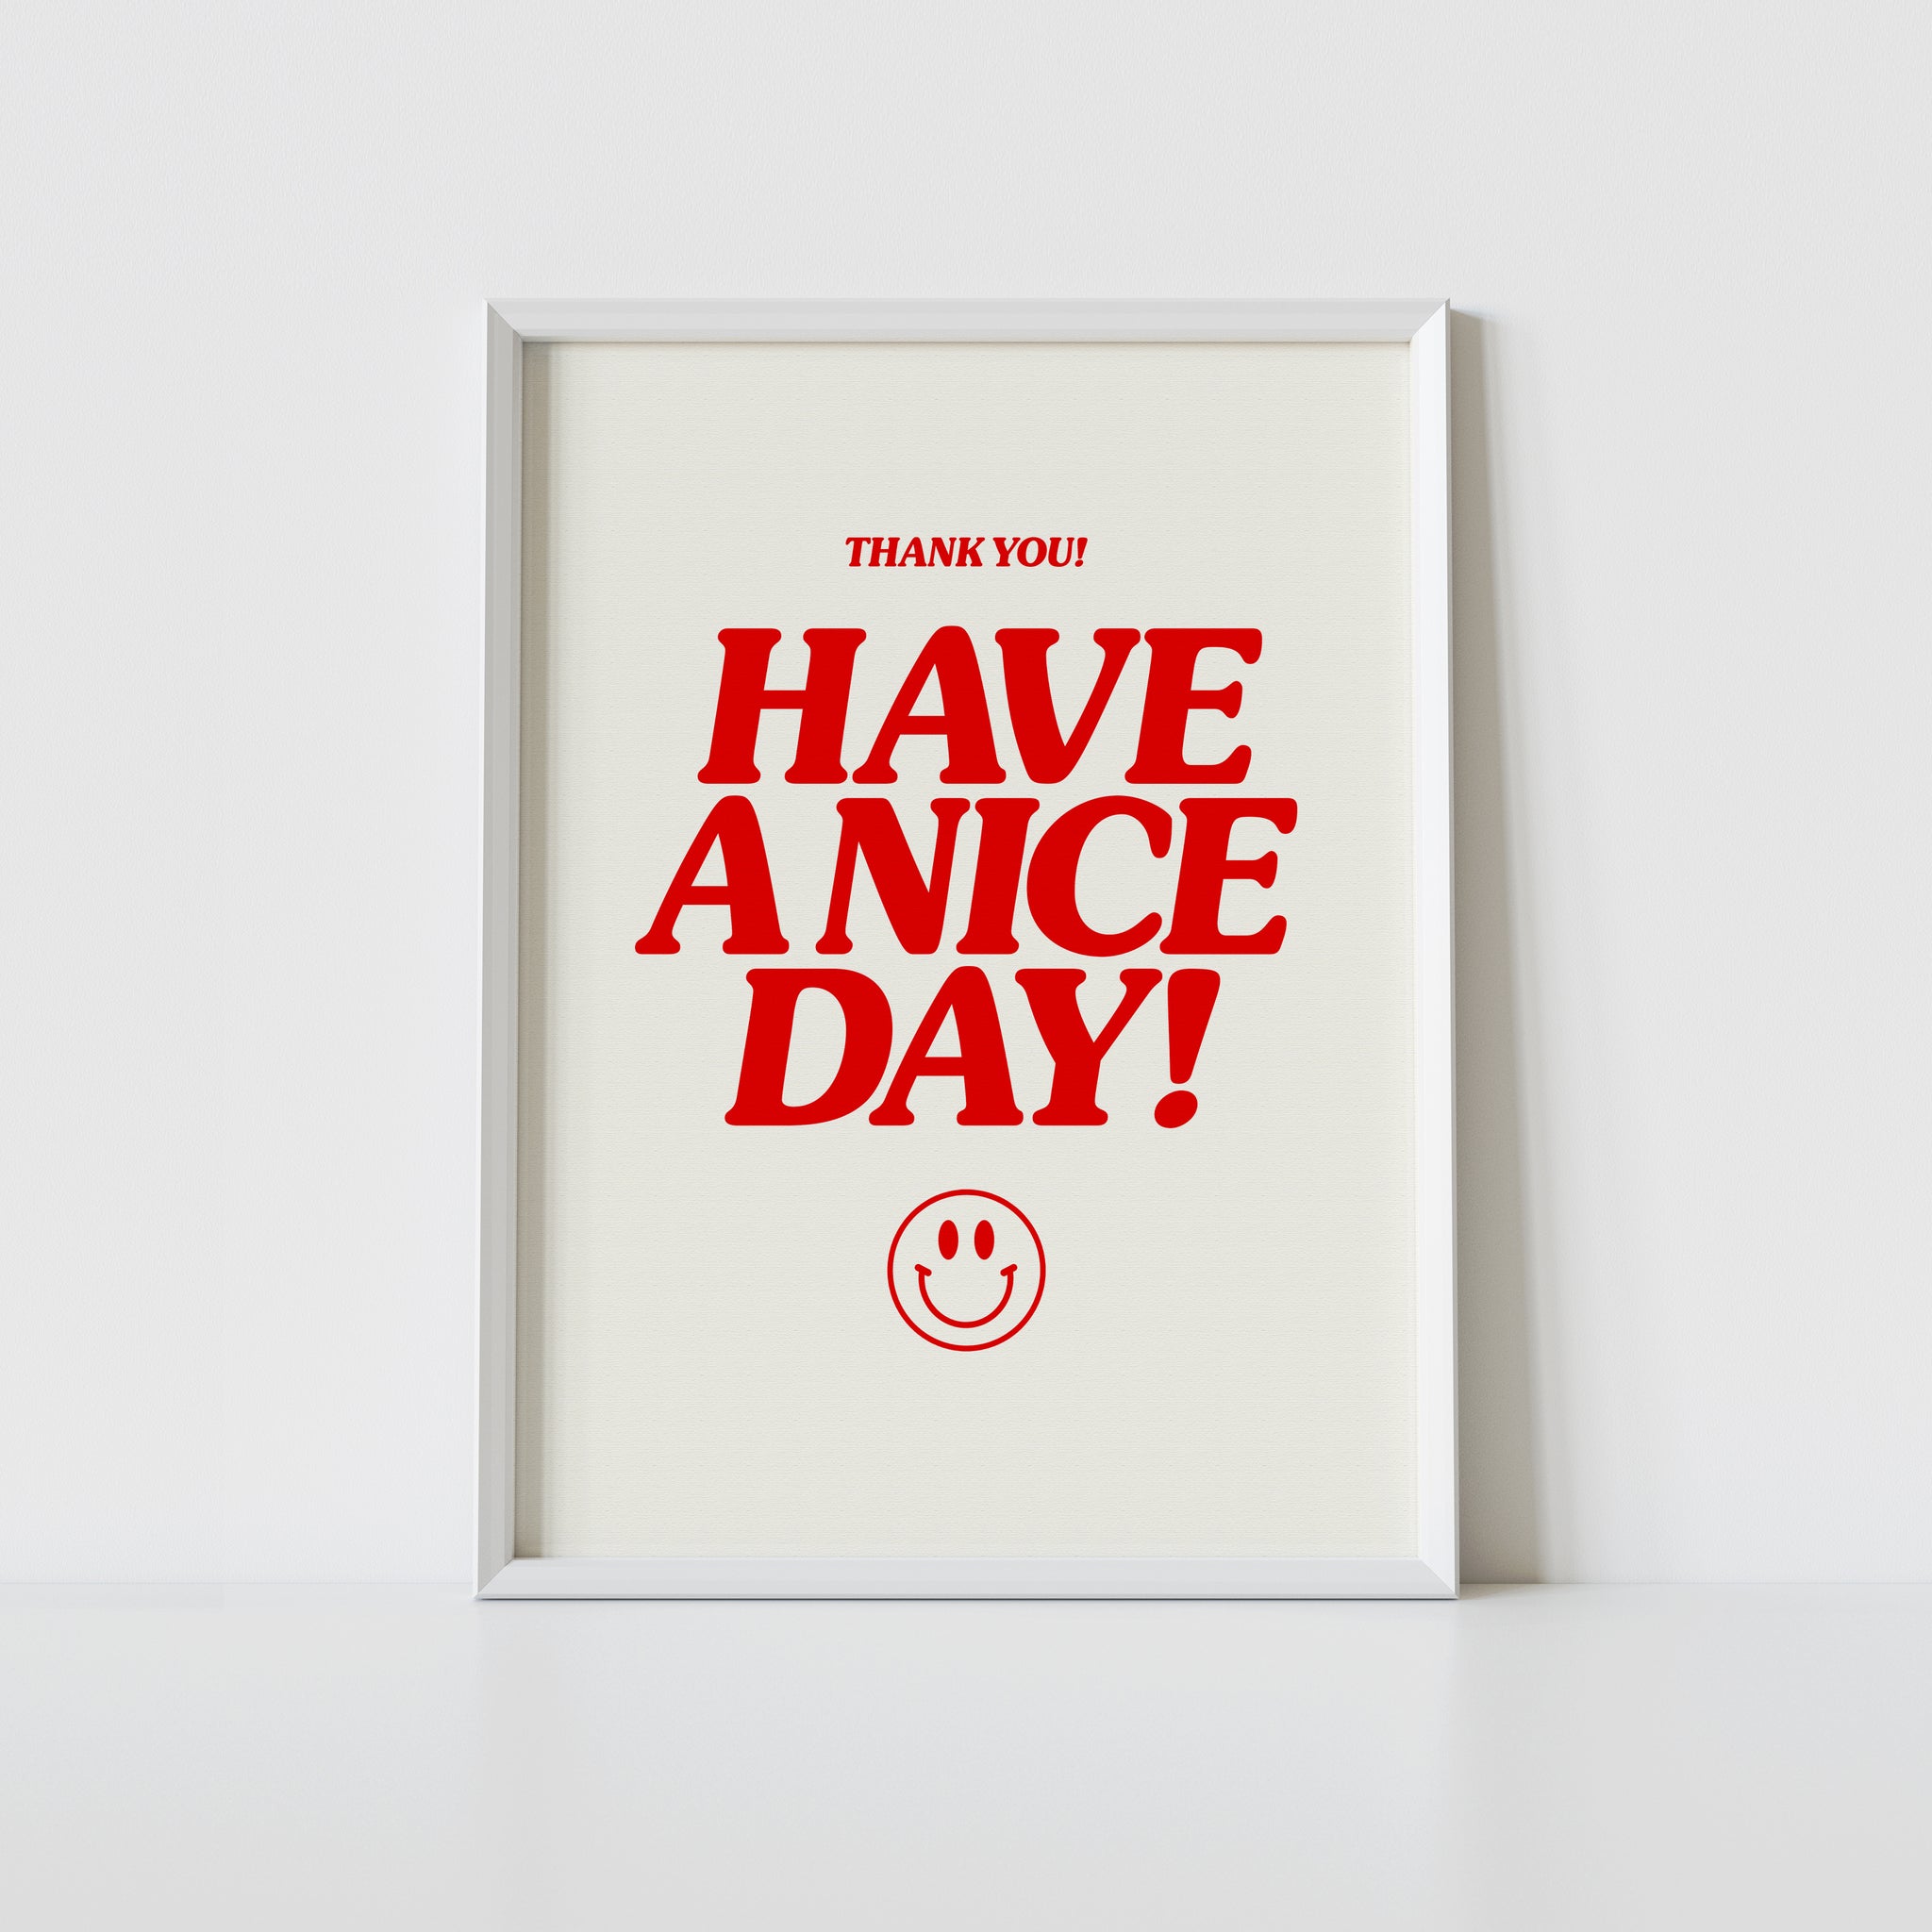 'Have A Nice Day' print